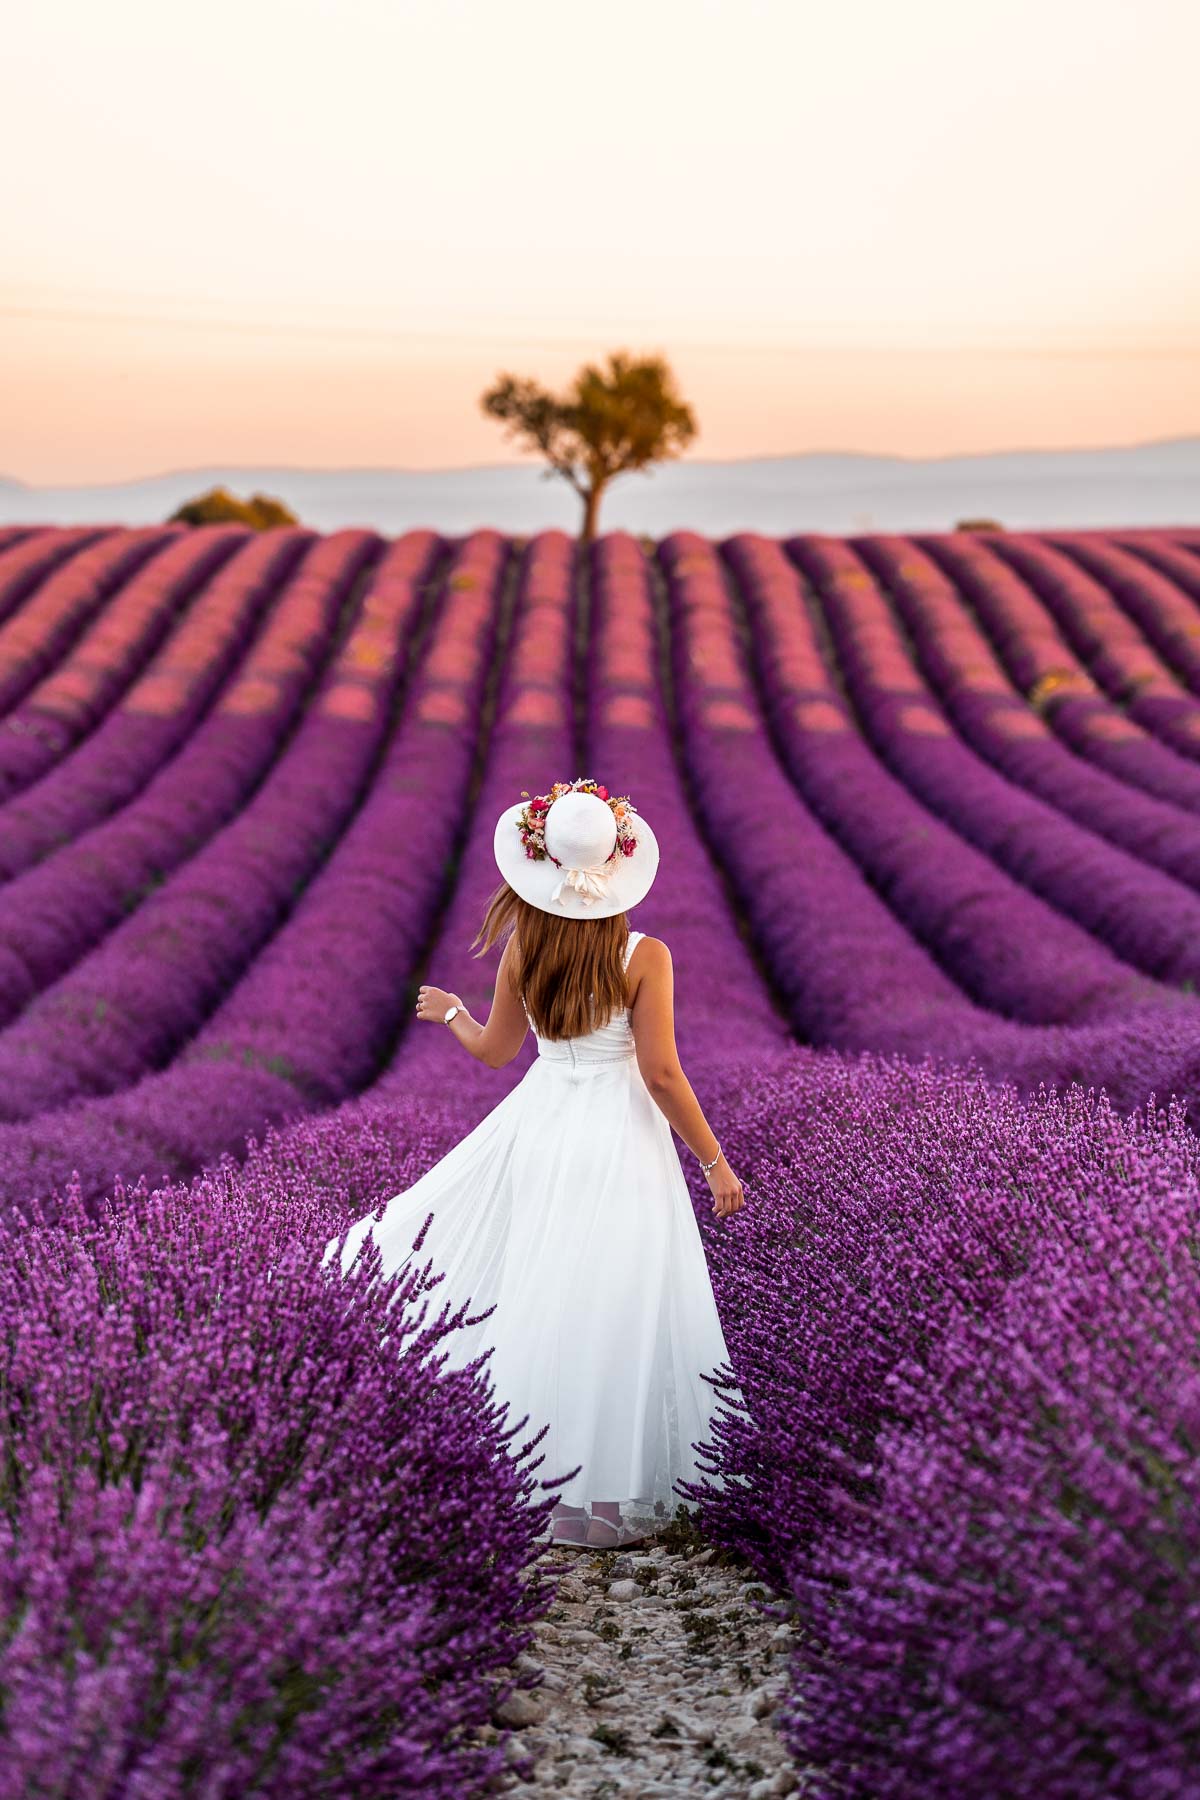 Girl in a white dress twirling in the middle of the lavender fields in Provence